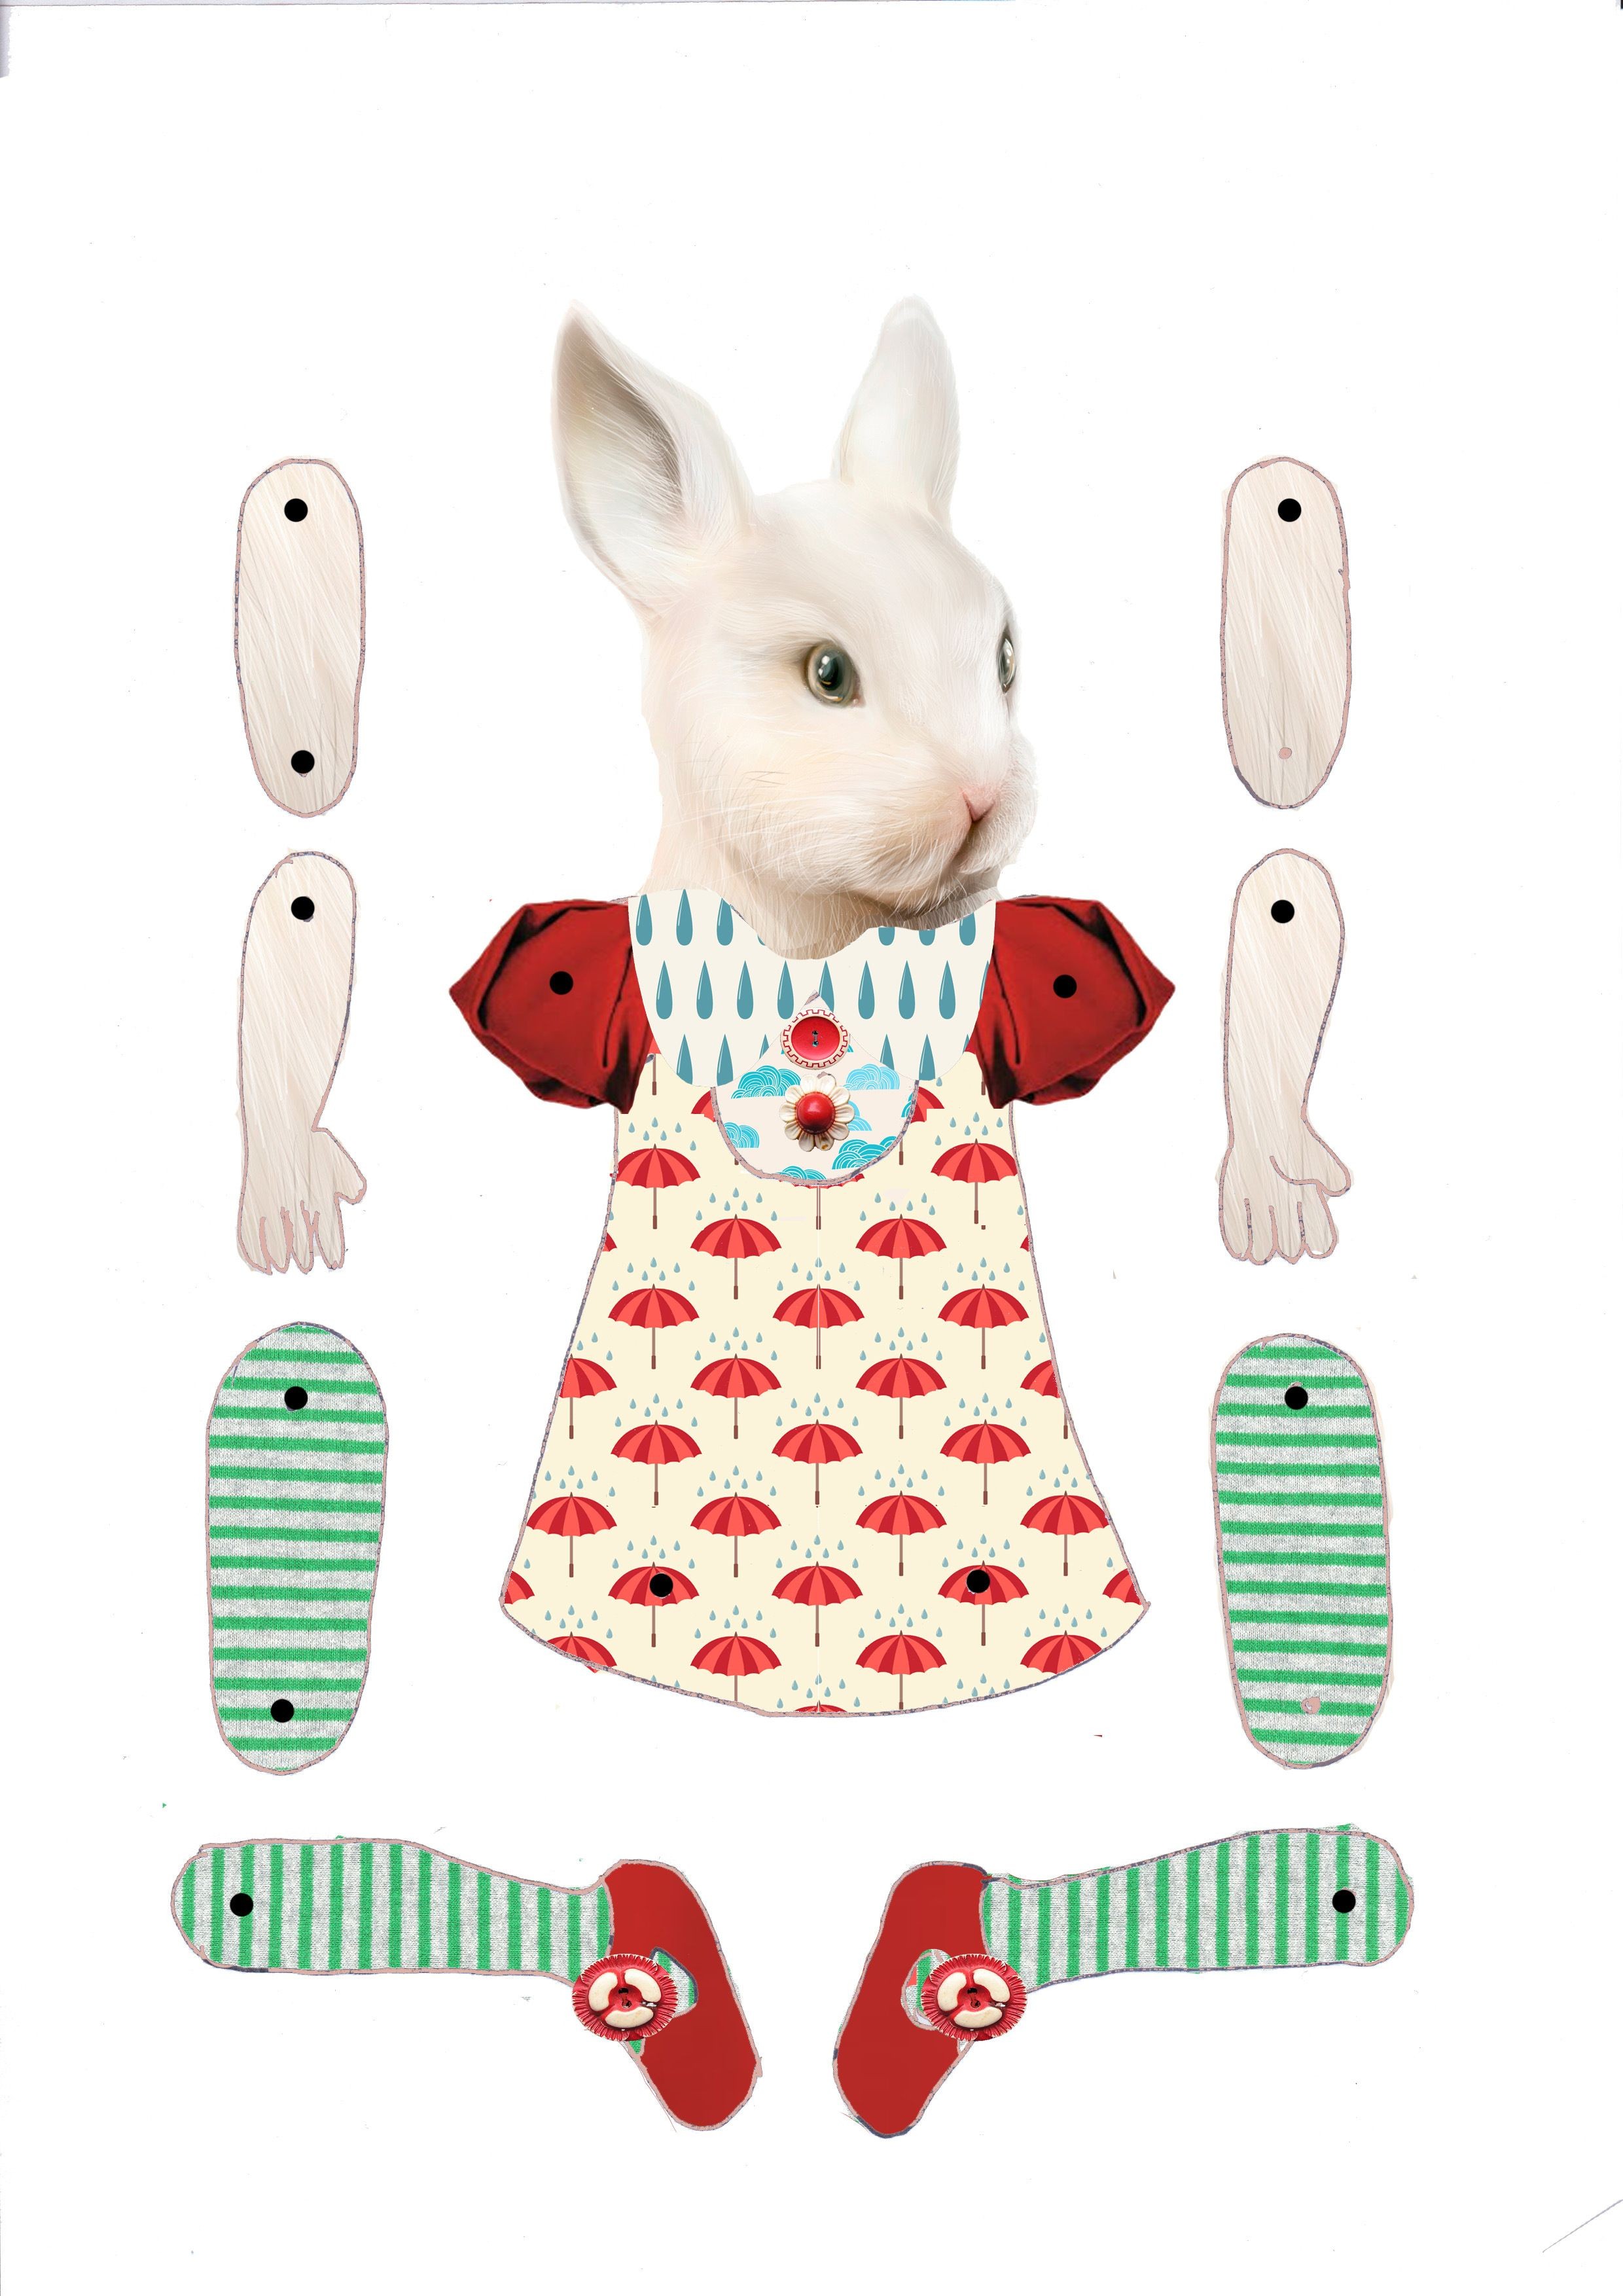 Bunny Papercraft Jointed Paper Doll Bunny … Excellent Things I Like